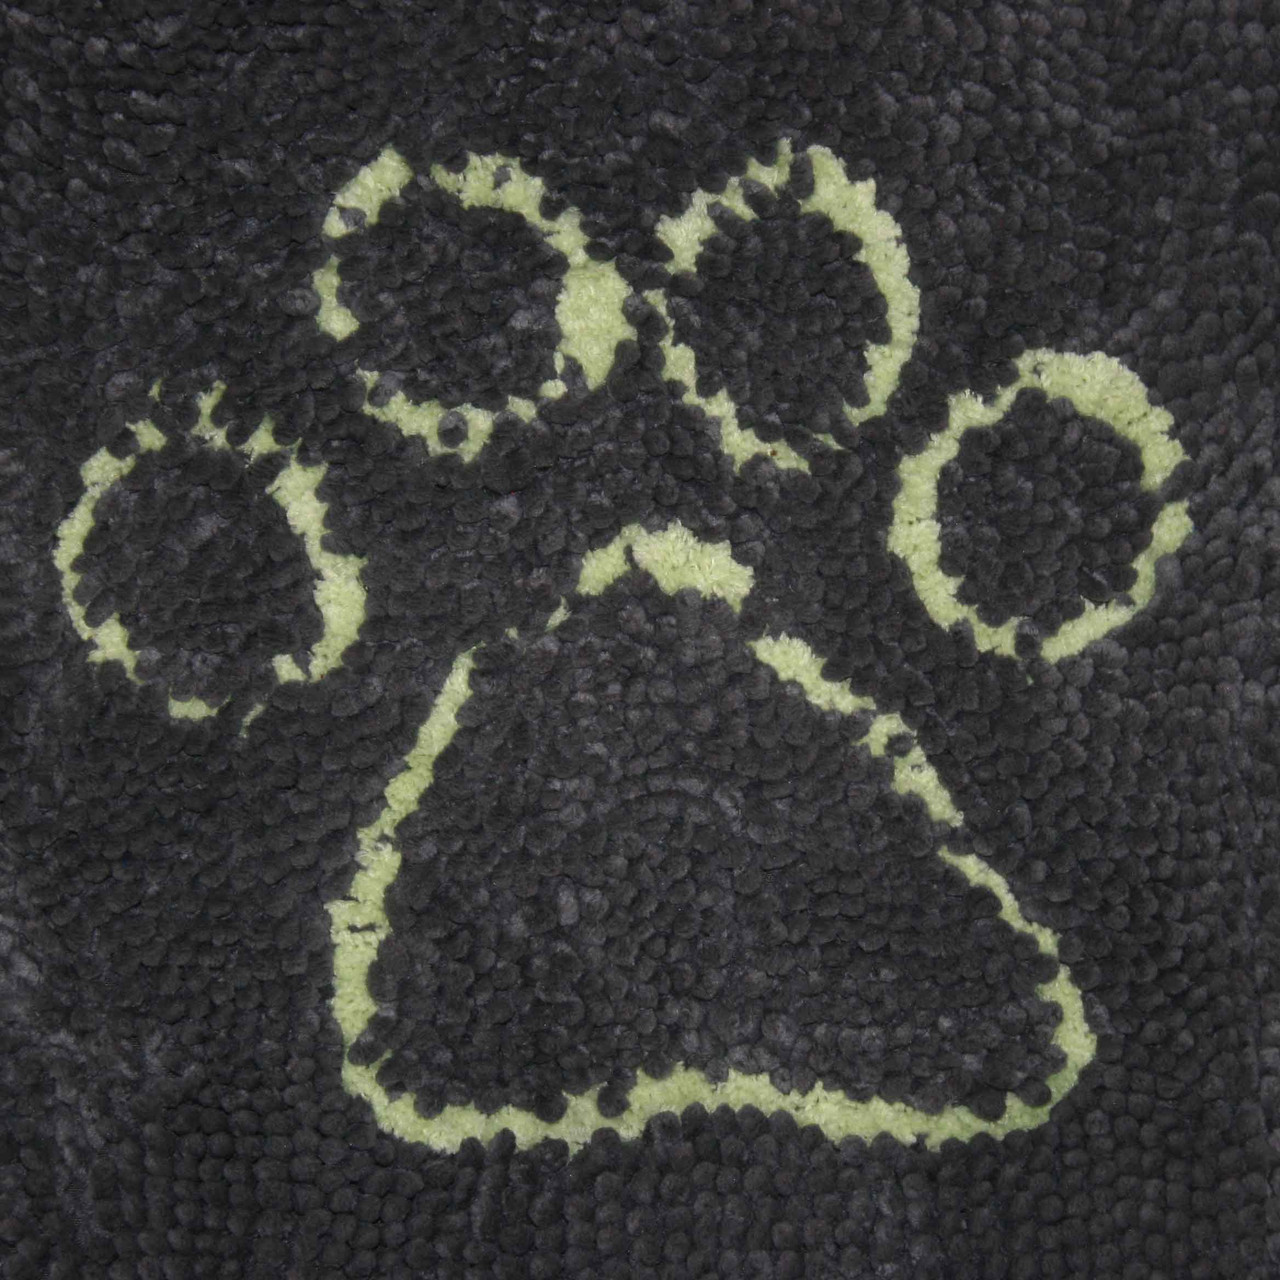 DGS Pet Products Dirty Dog Door Mat (Cool Grey/Lime Green / Large)